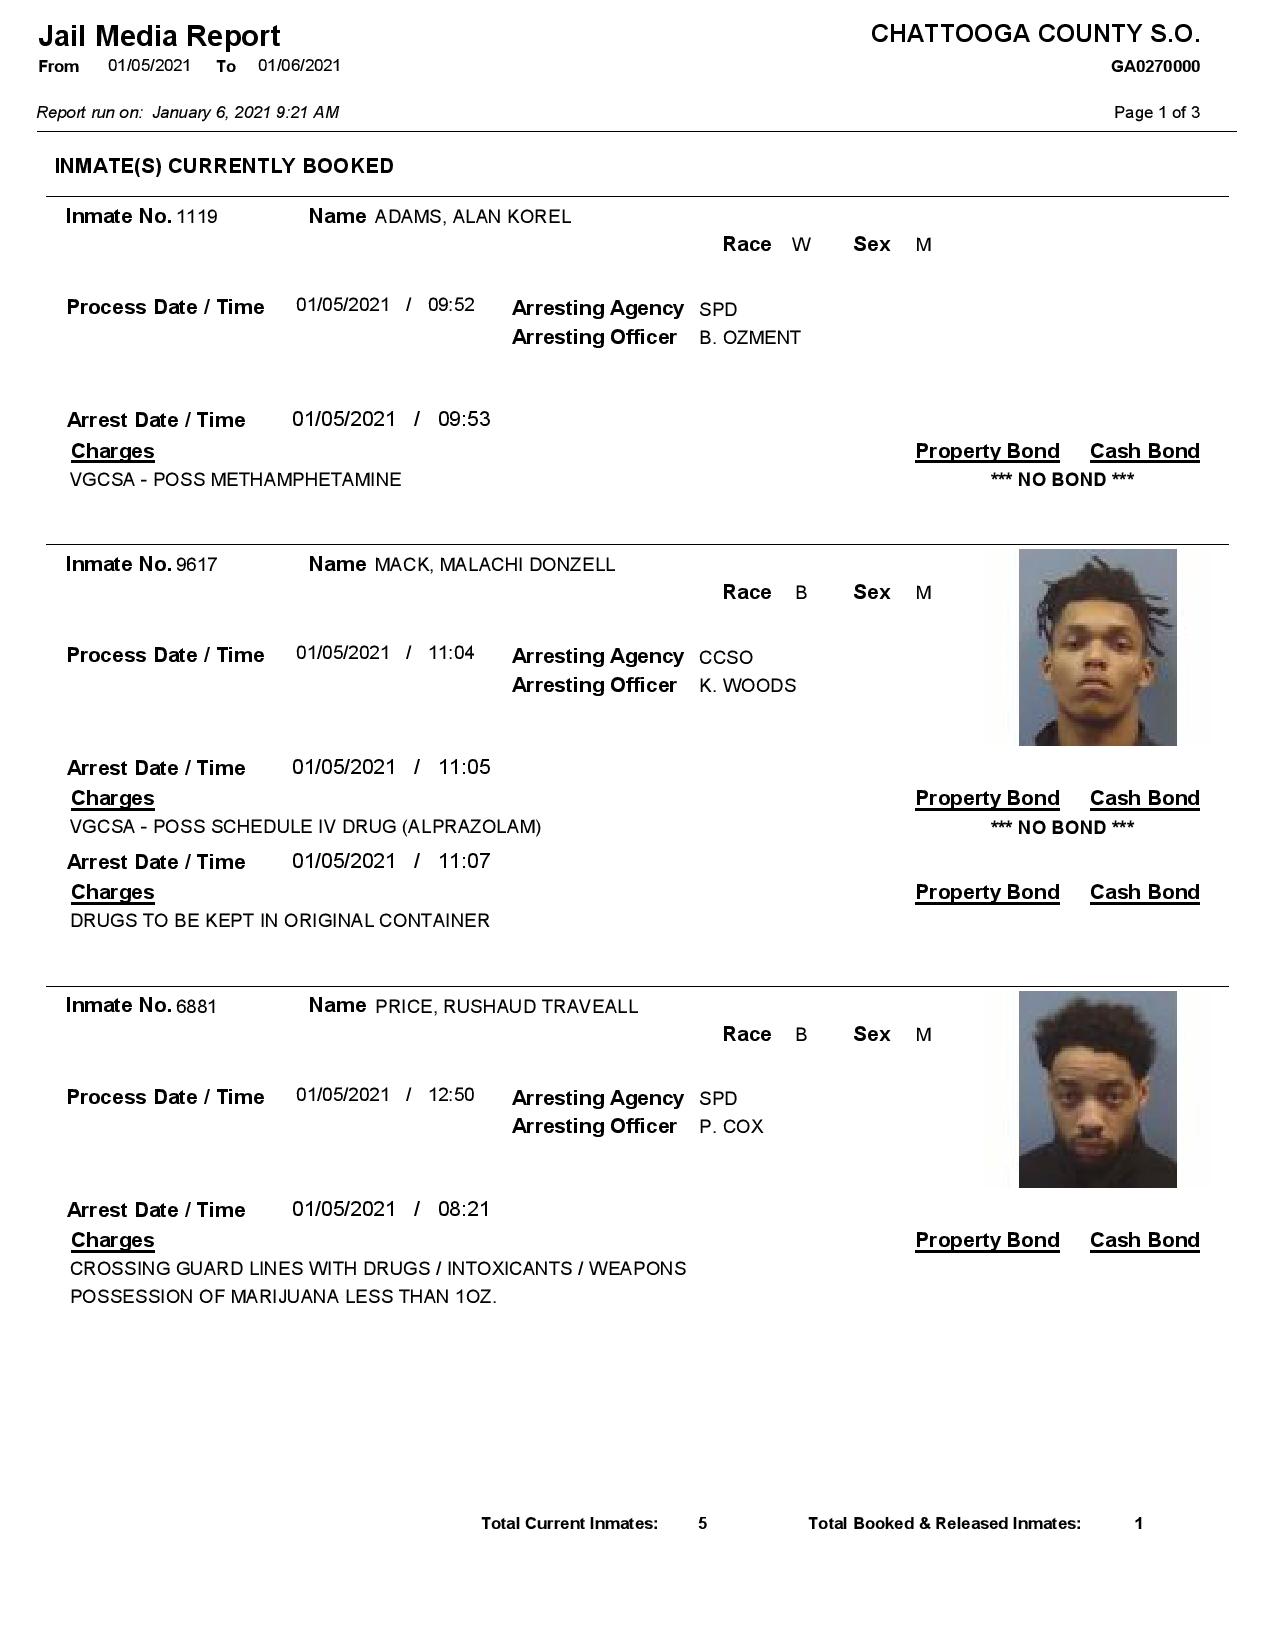 chattooga jail 01.06.21-page-001